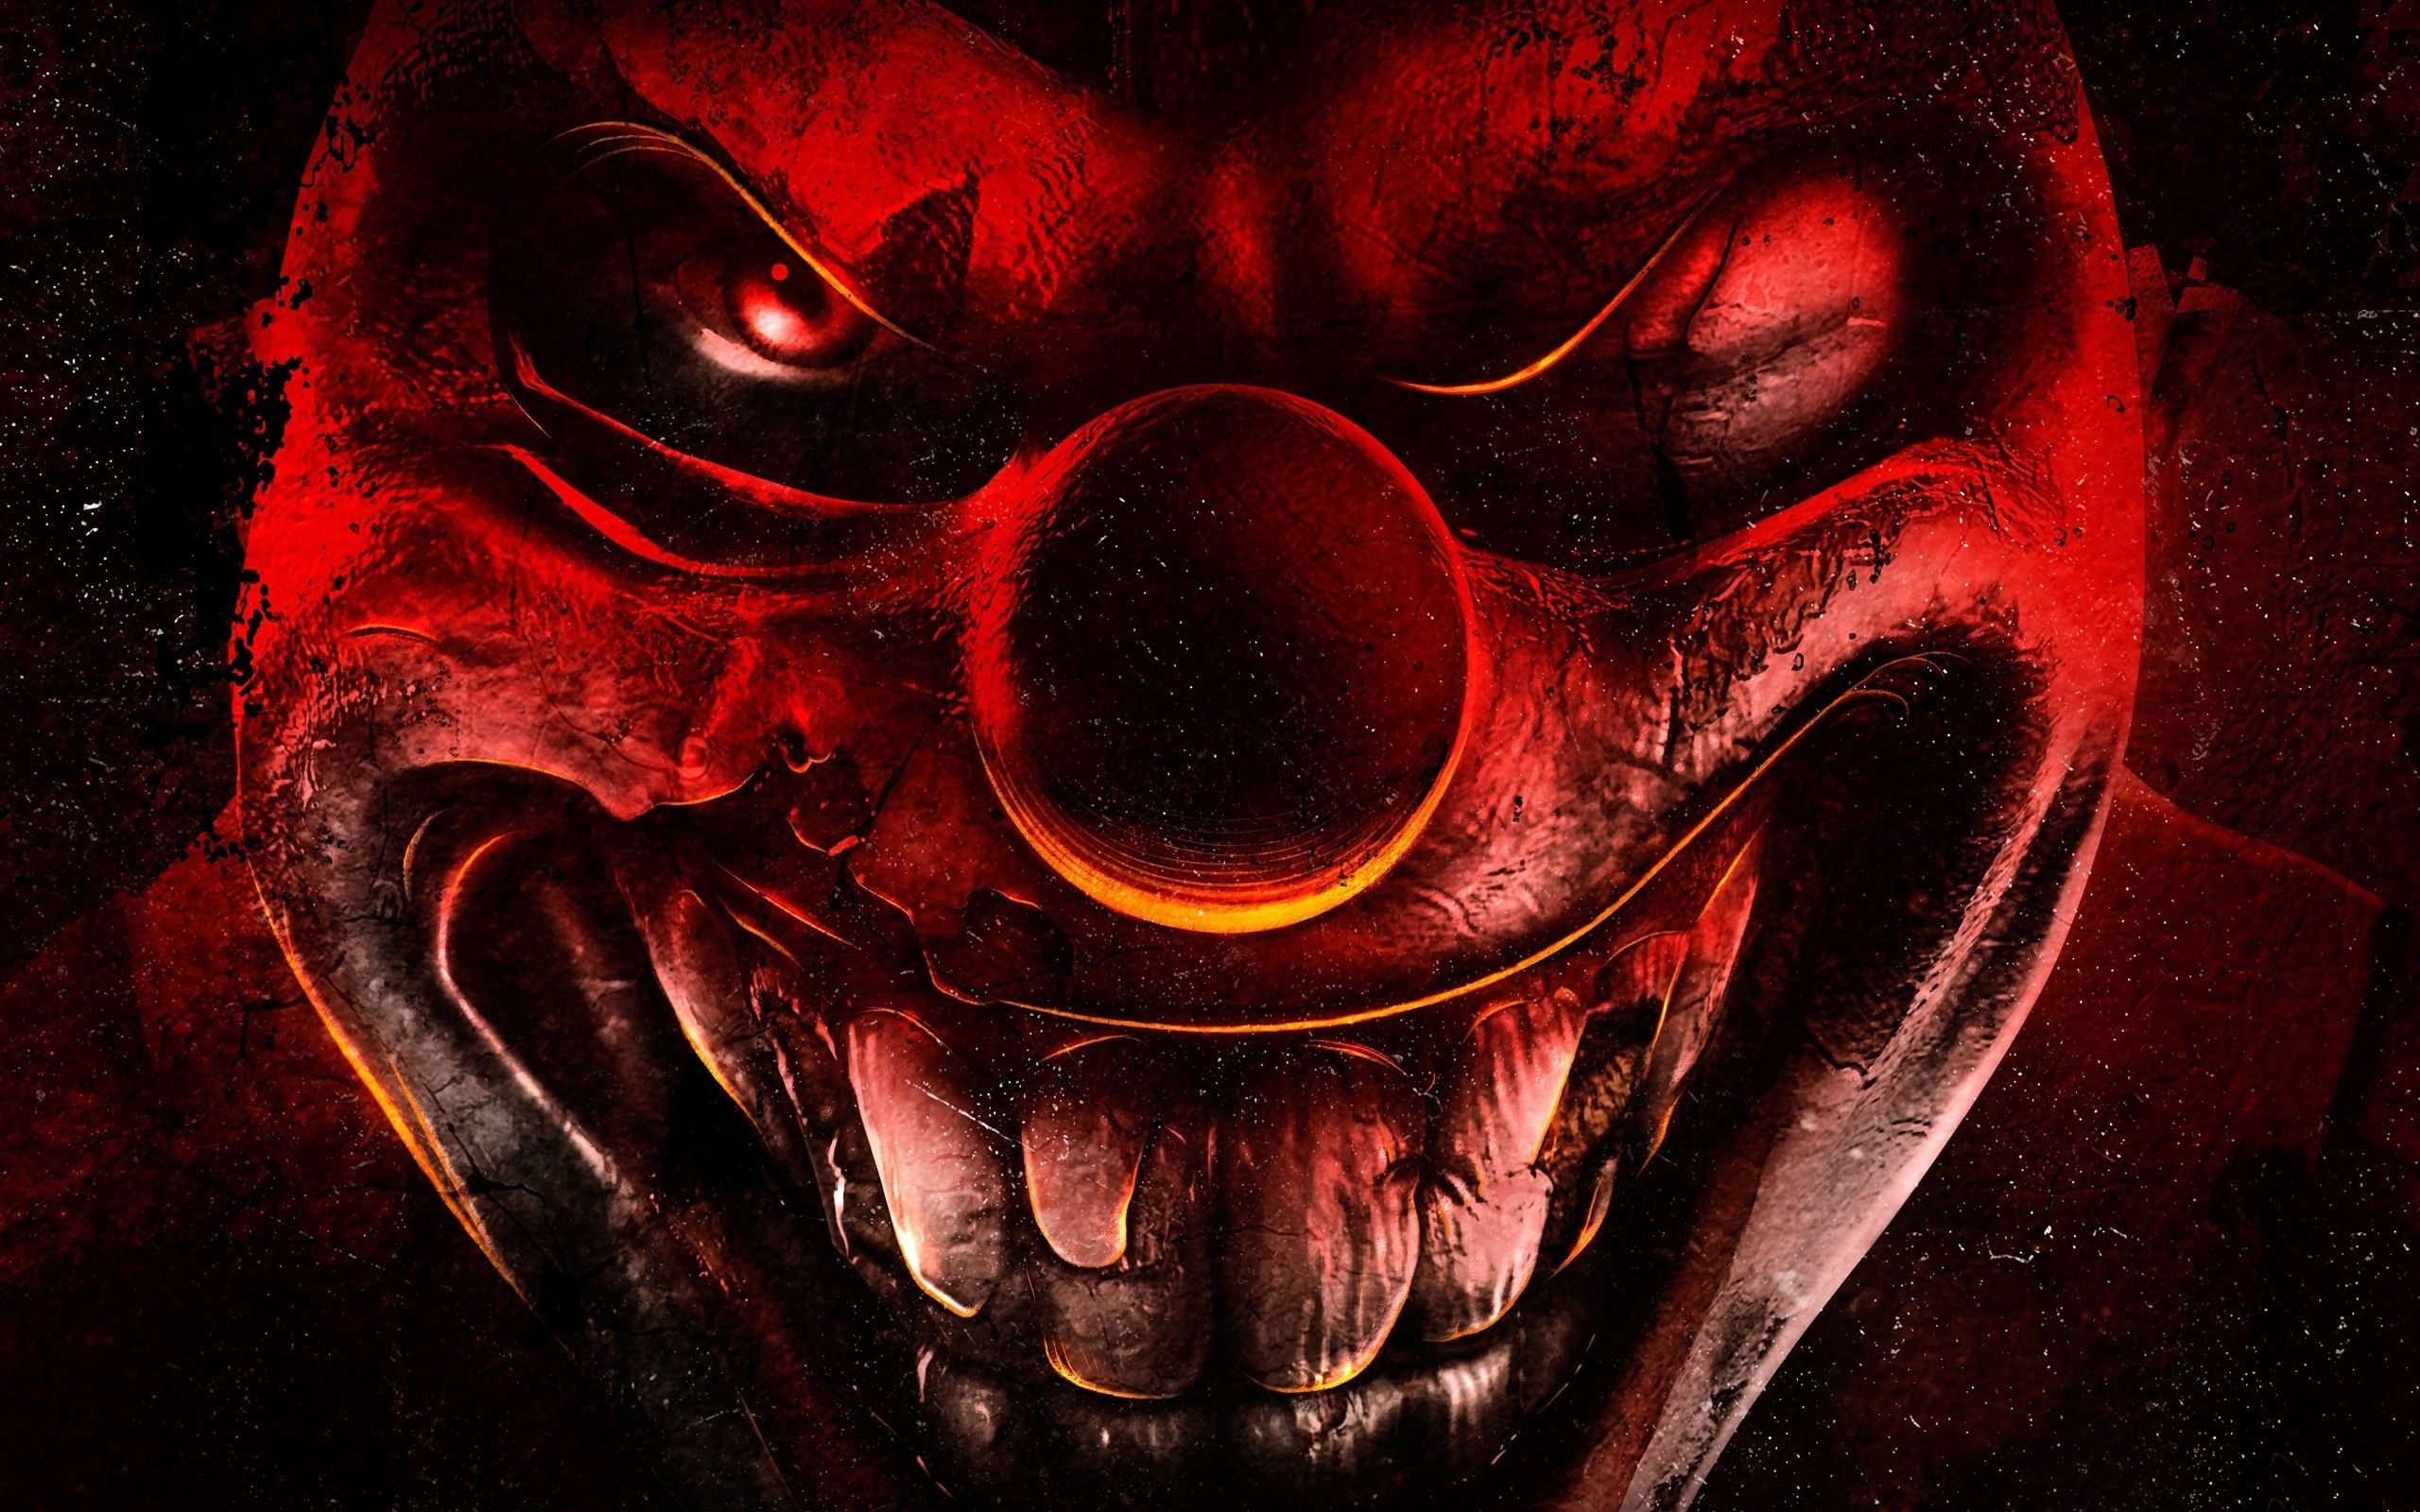 A red and black clown face with glowing eyes - Clown